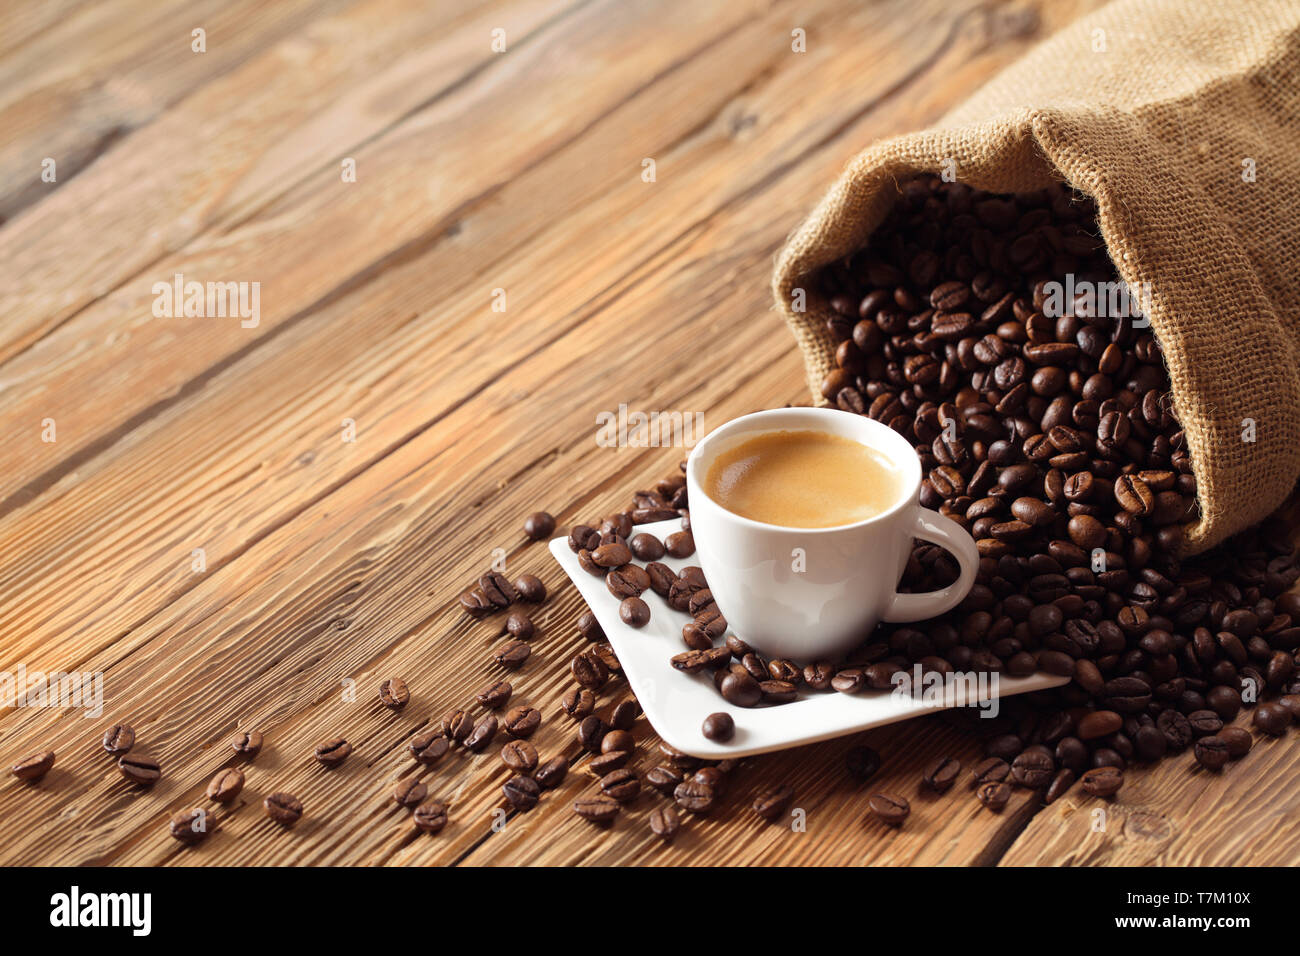 Coffee cup espresso with coffee beans and wooden background Stock Photo